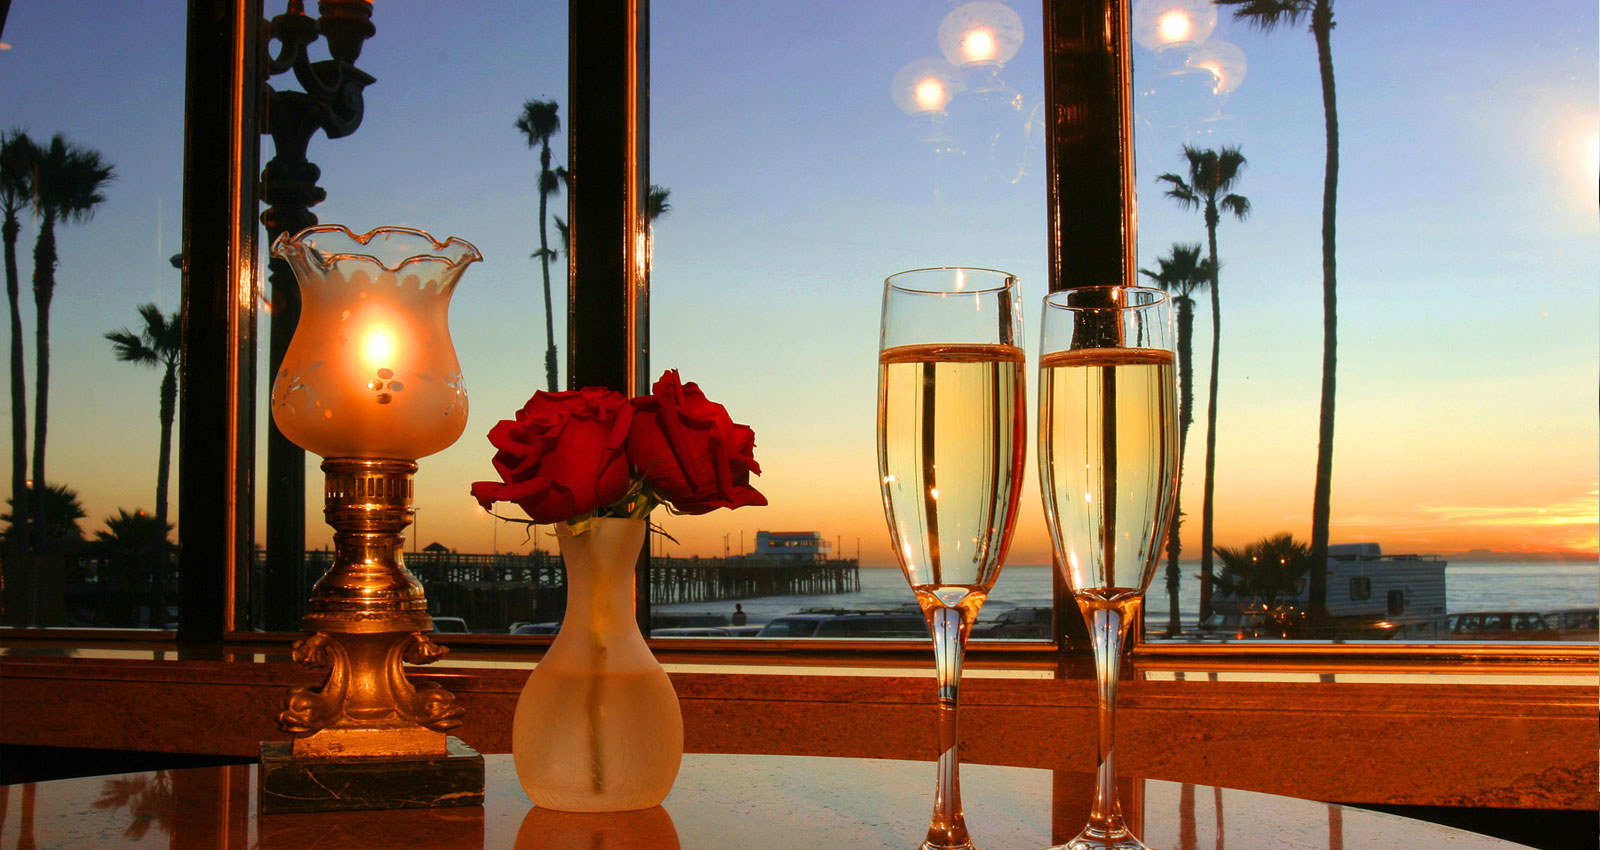 Sunset view with Champagne glasses